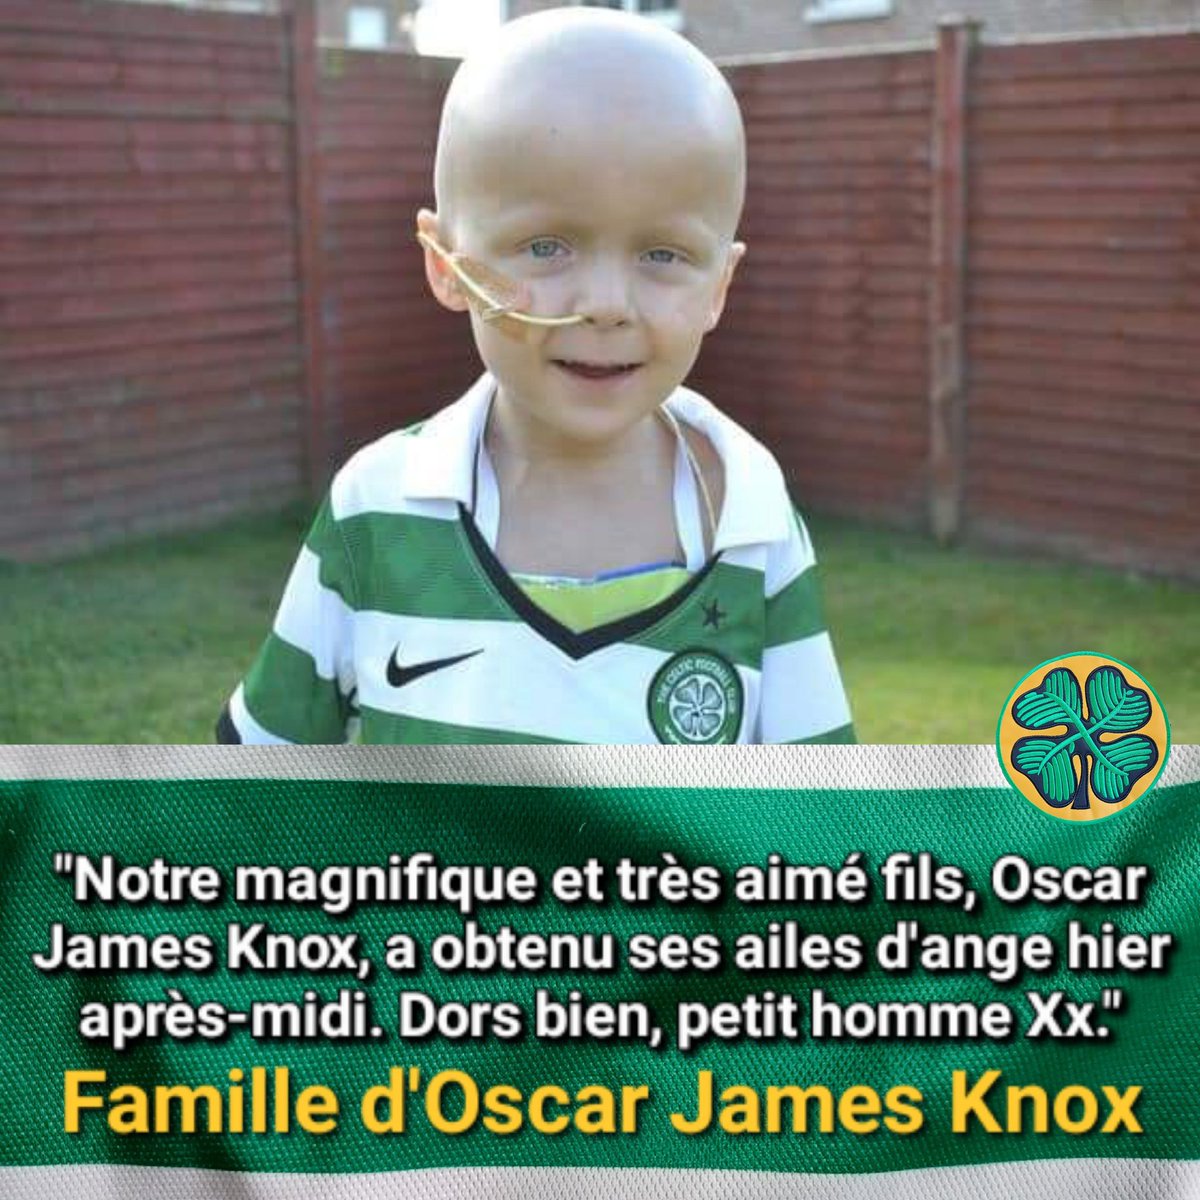 'Our beautiful amazing and much loved son Oscar James Knox gained his angel wings yest afternoon. Sleep tight little man Xx.' Family of Oscar James Knox YOU'LL NEVER WALK ALONE OSCAR💚🍀 Rest In Peace Little Angel 💚🕊🍀 #CelticFC #OscarKnox #WeeOscar #Celtic #Celts #YNWA